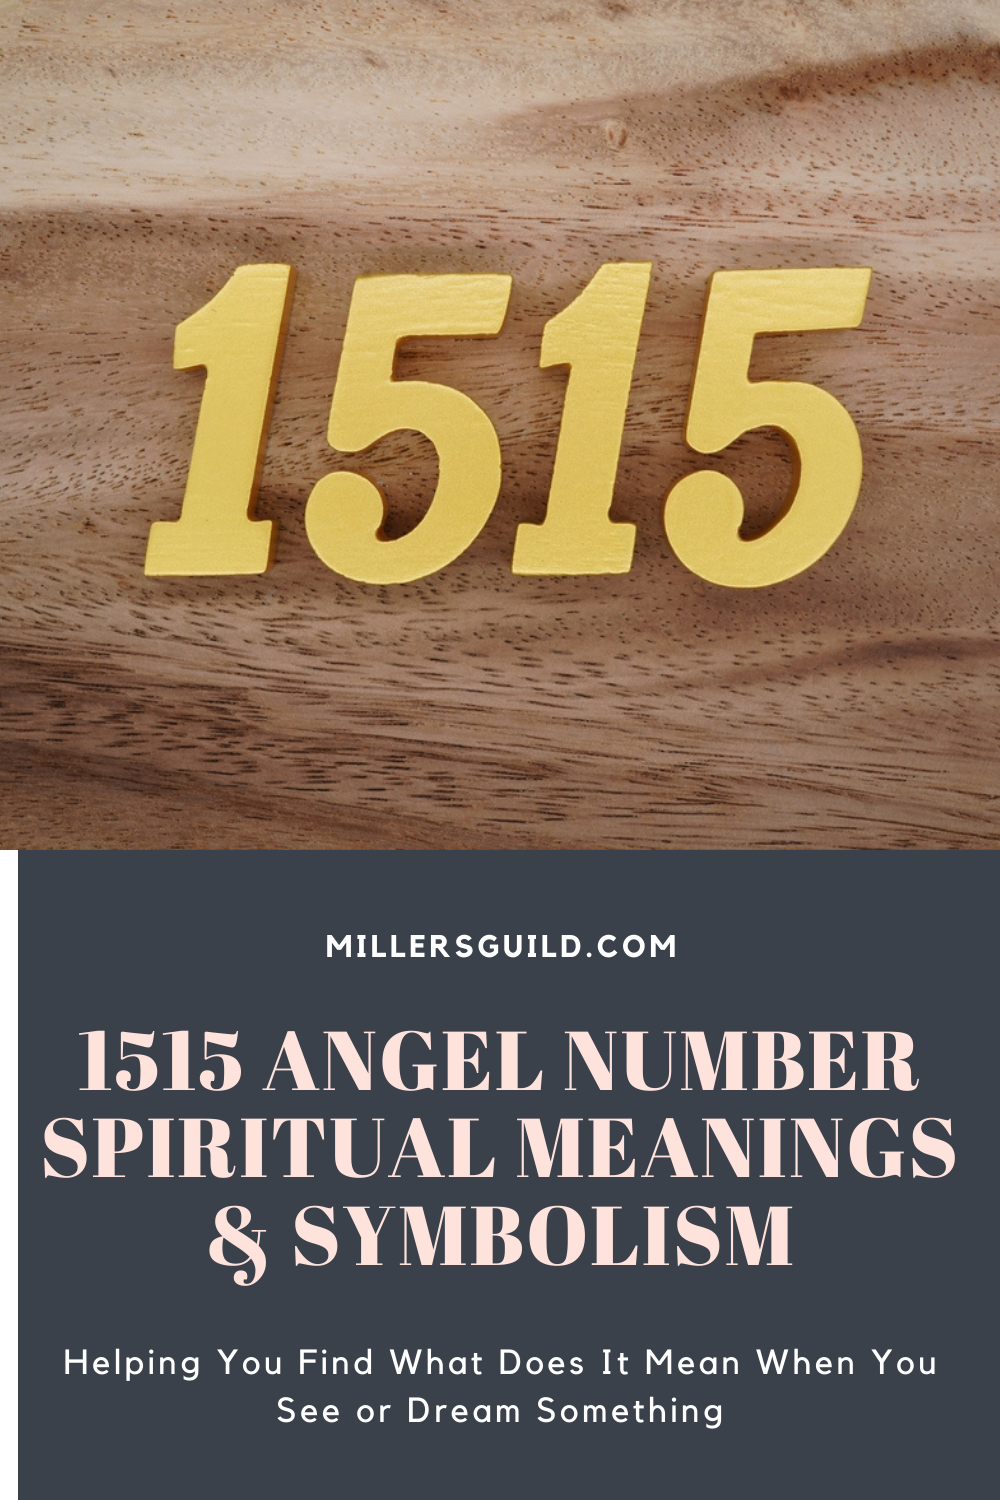 1515 Angel Number Spiritual Meanings & Symbolism 2